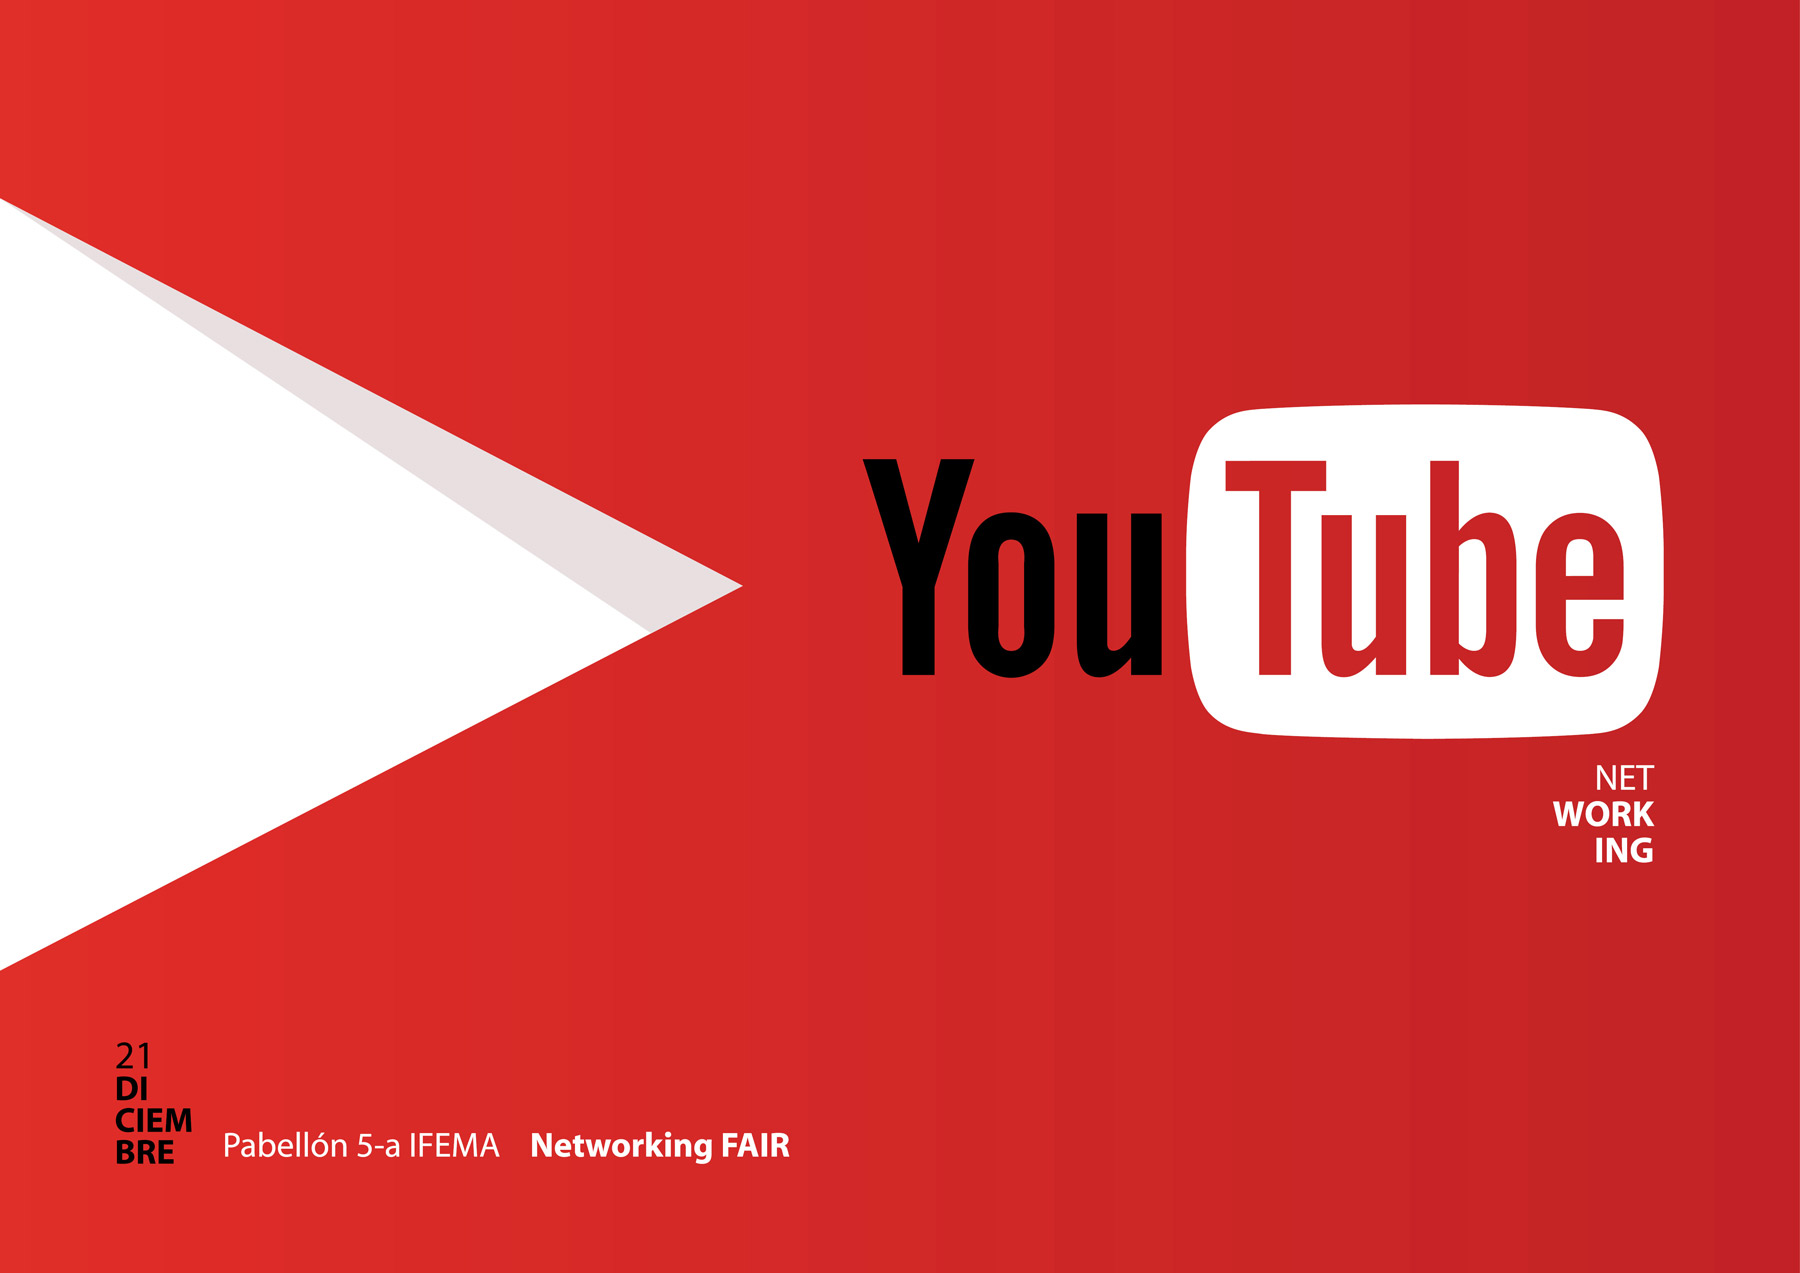 View YouTube Videos With YouTube's IP Address - Lifewire